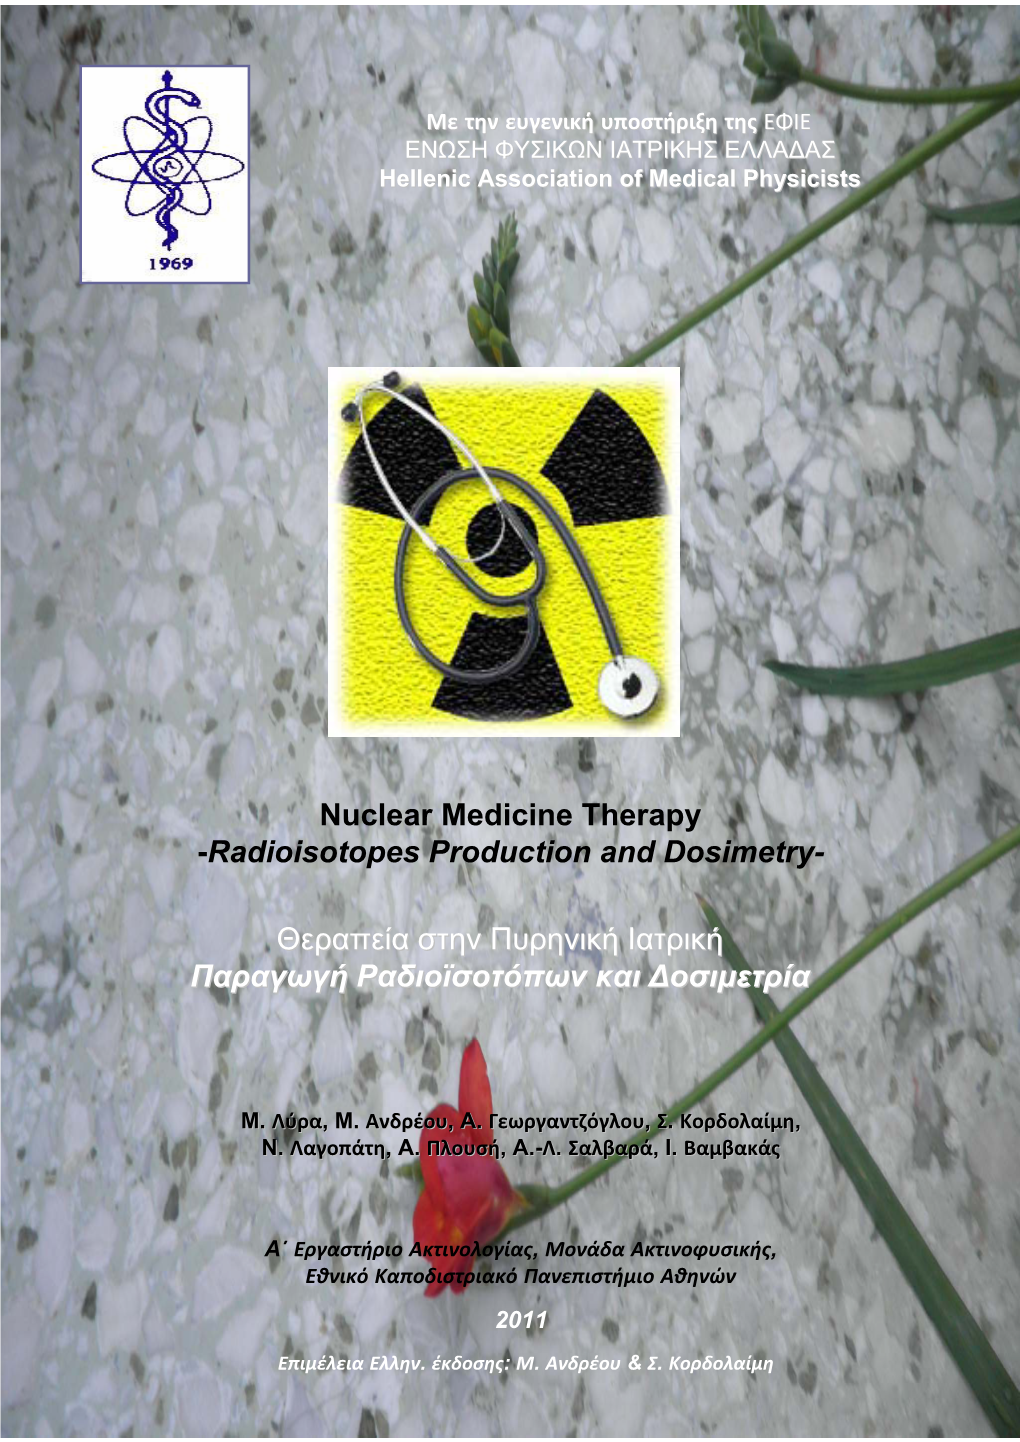 Nuclear Medicine Therapy -Radioisotopes Production and Dosimetry